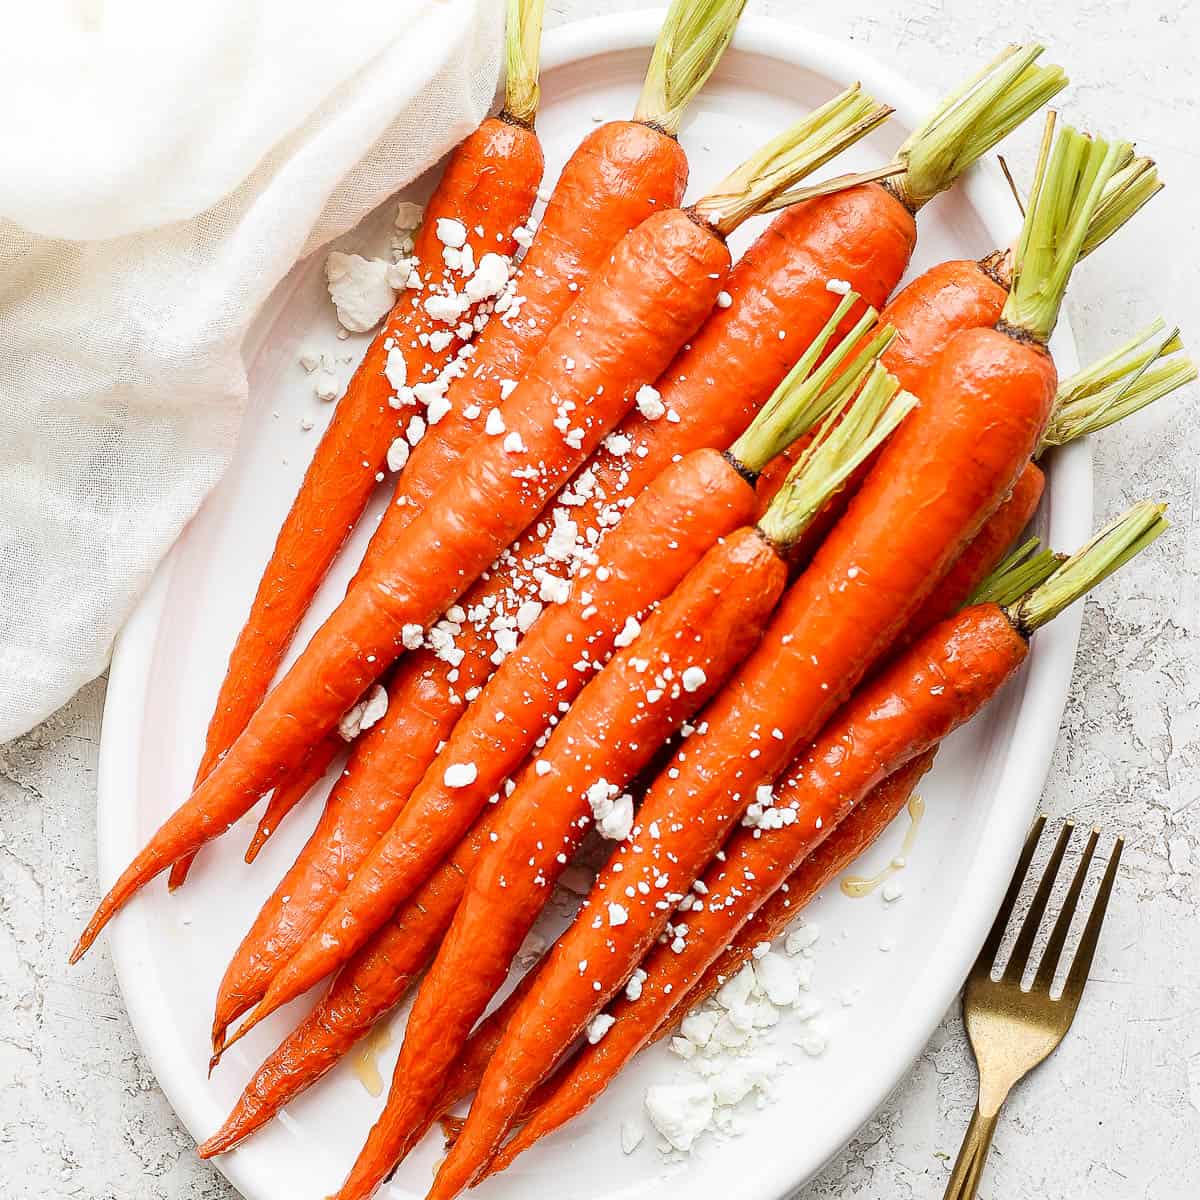 Whole roasted carrots with honey.